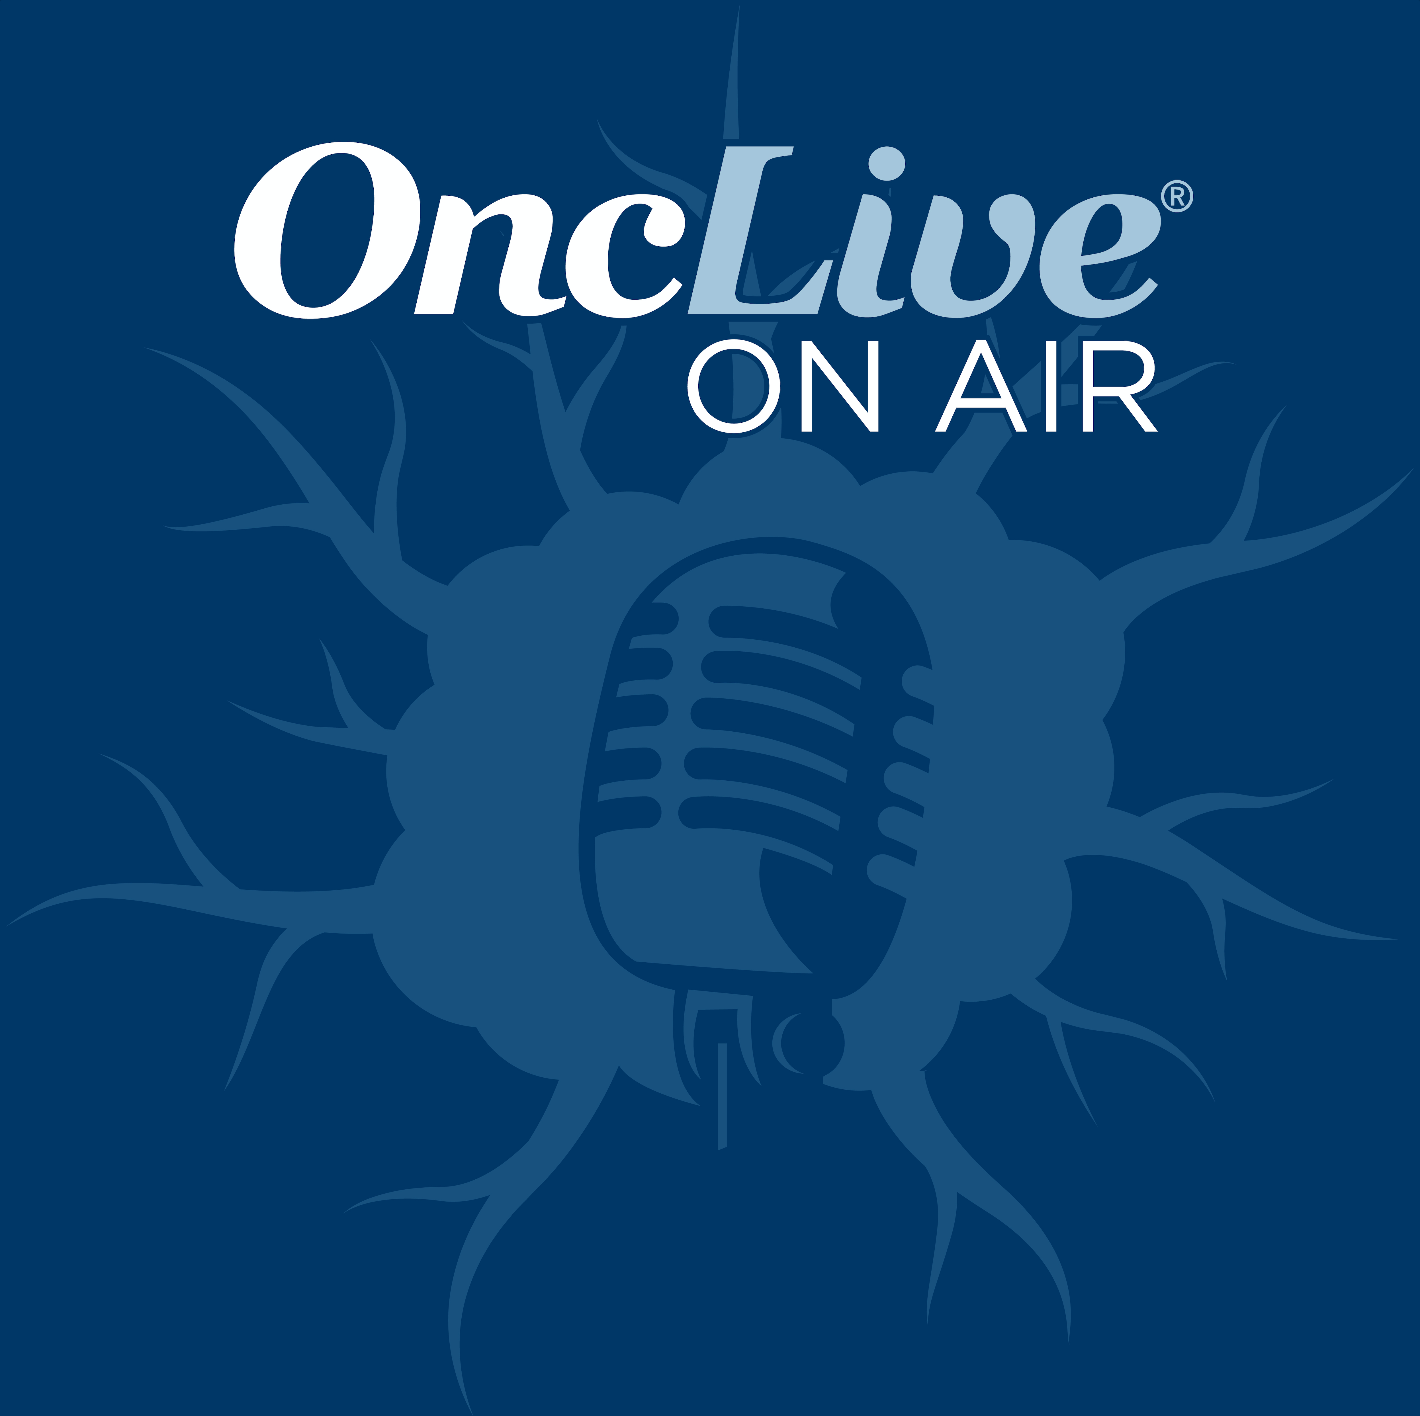 OncLive On Air™